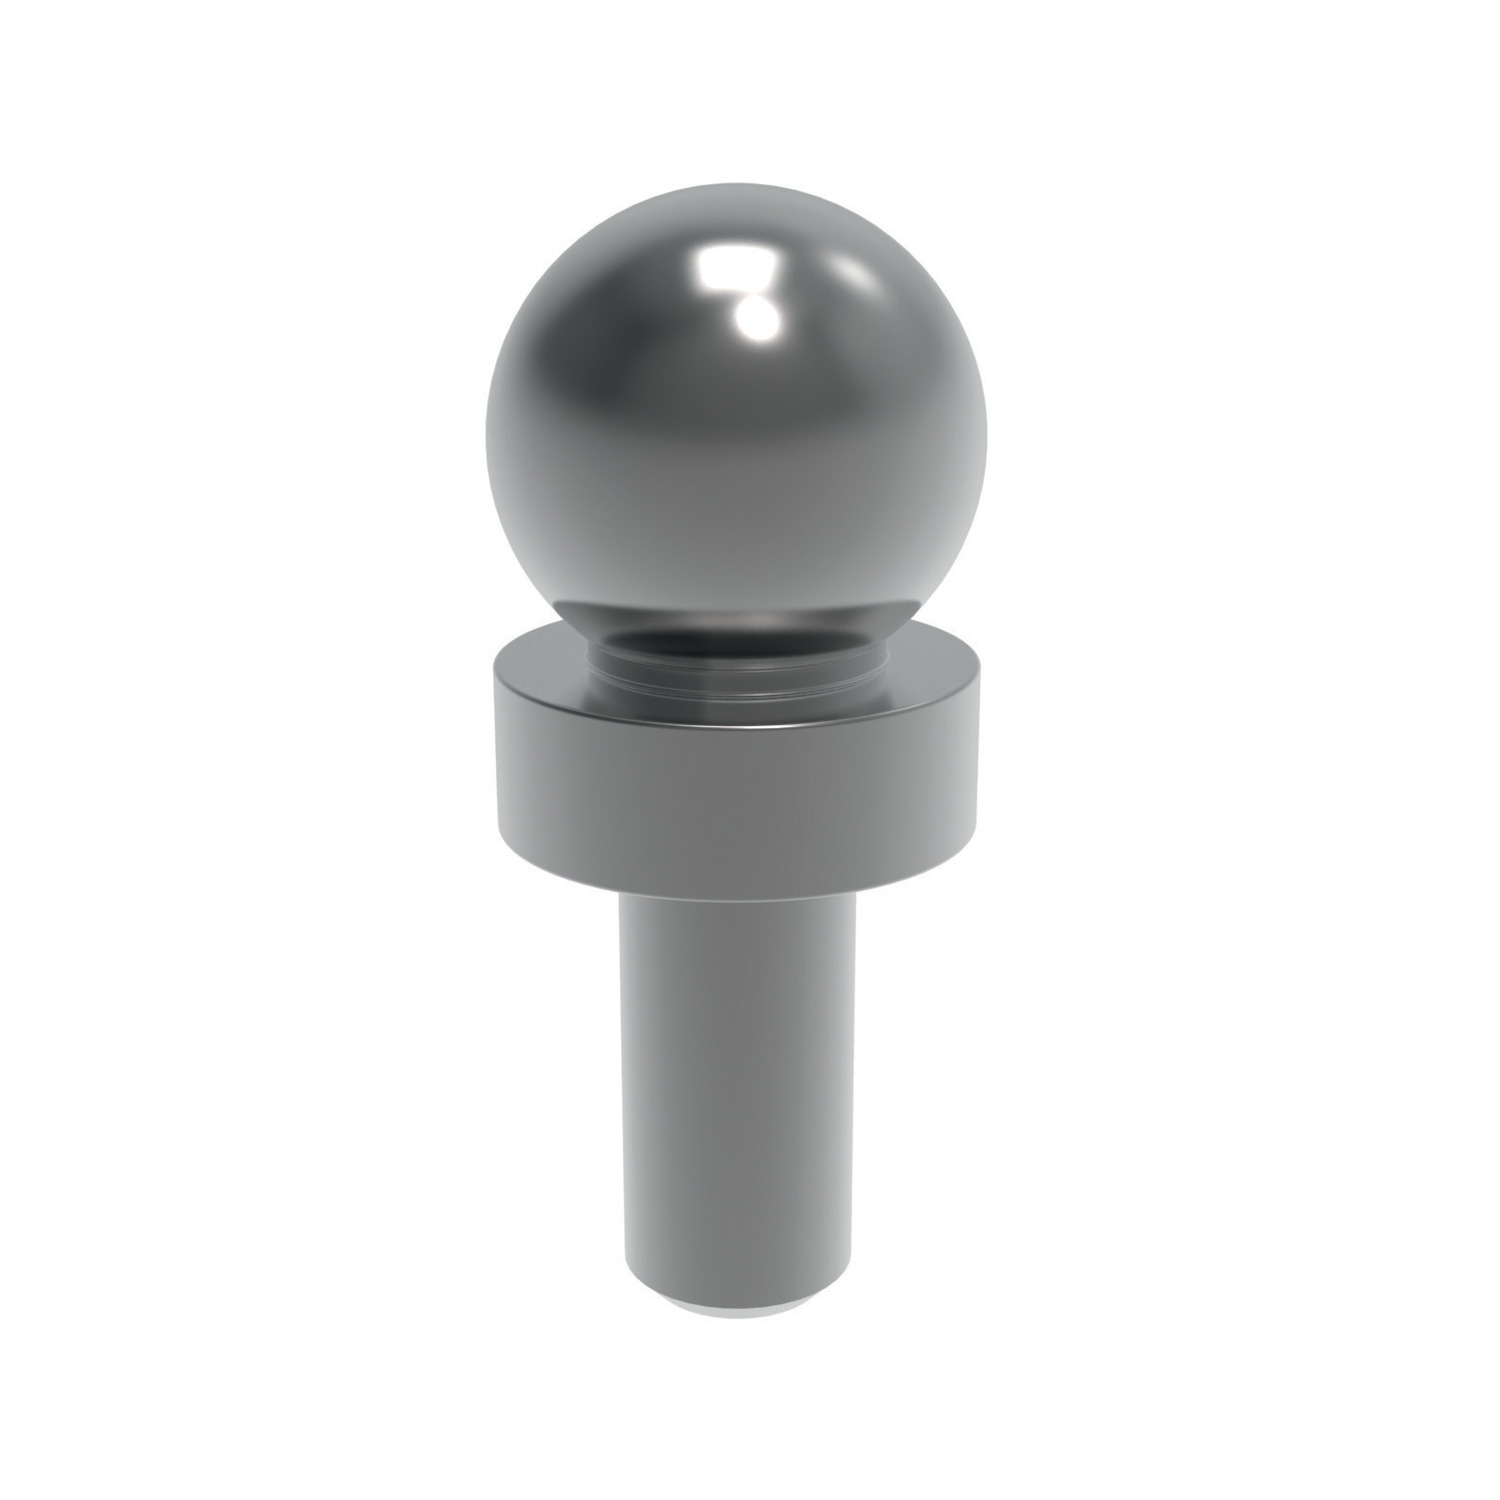 Product 20508, Tooling Balls - Imperial shoulder type - one piece construction / 